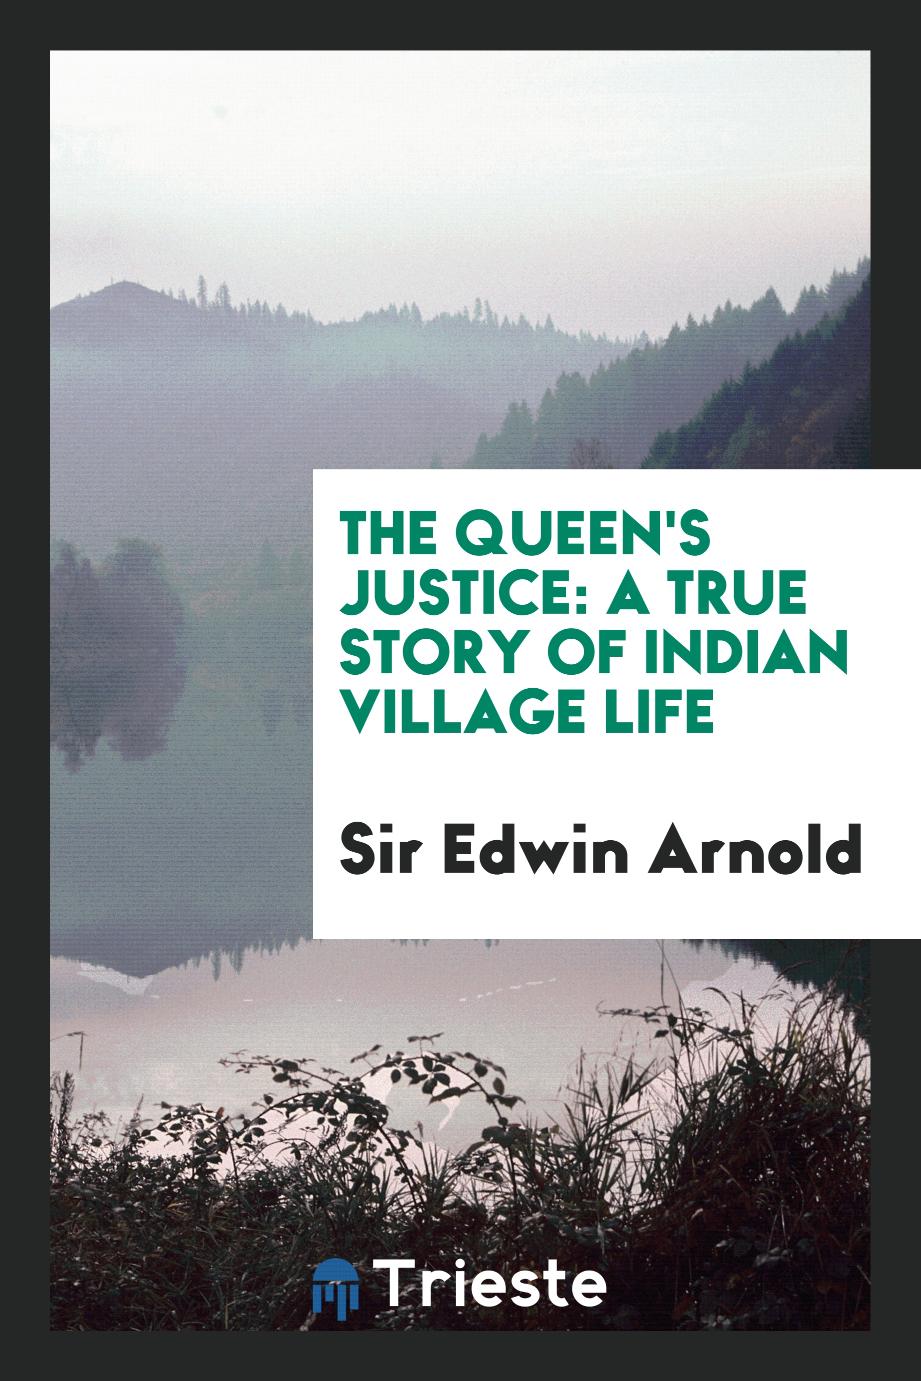 The queen's justice: a true story of Indian village life